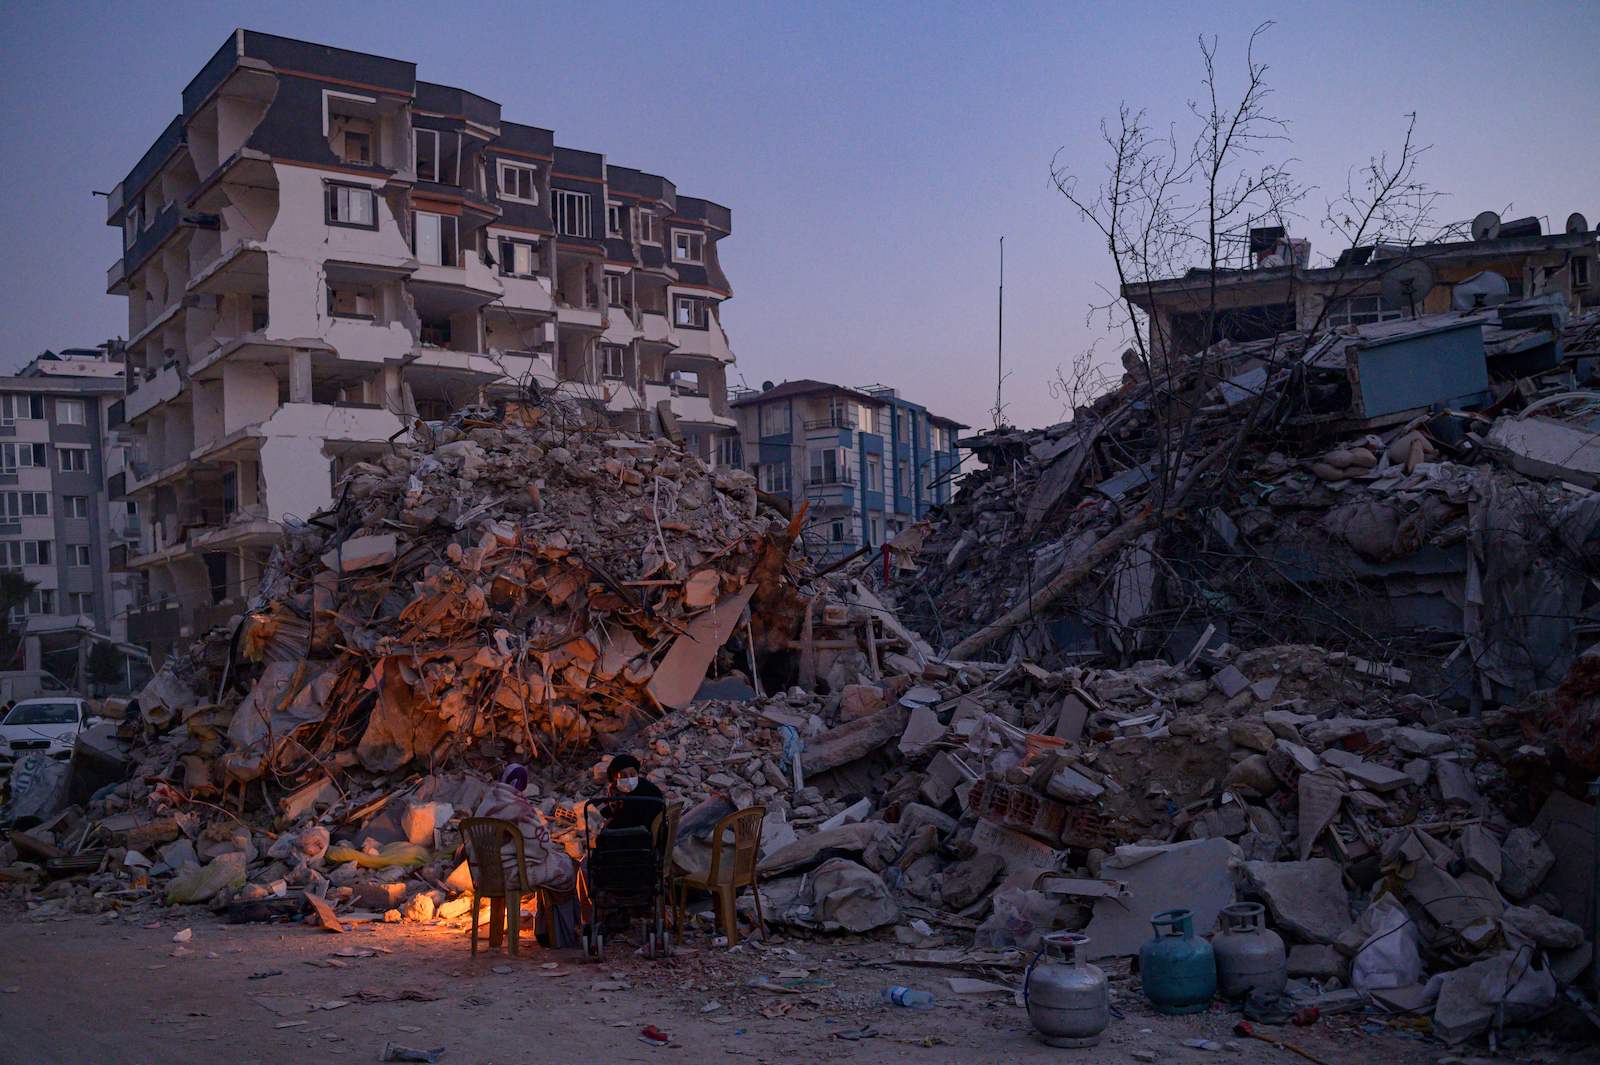 Two people sitting at a bonfire at twilight amid a pile of rubble, one building still standing behind them